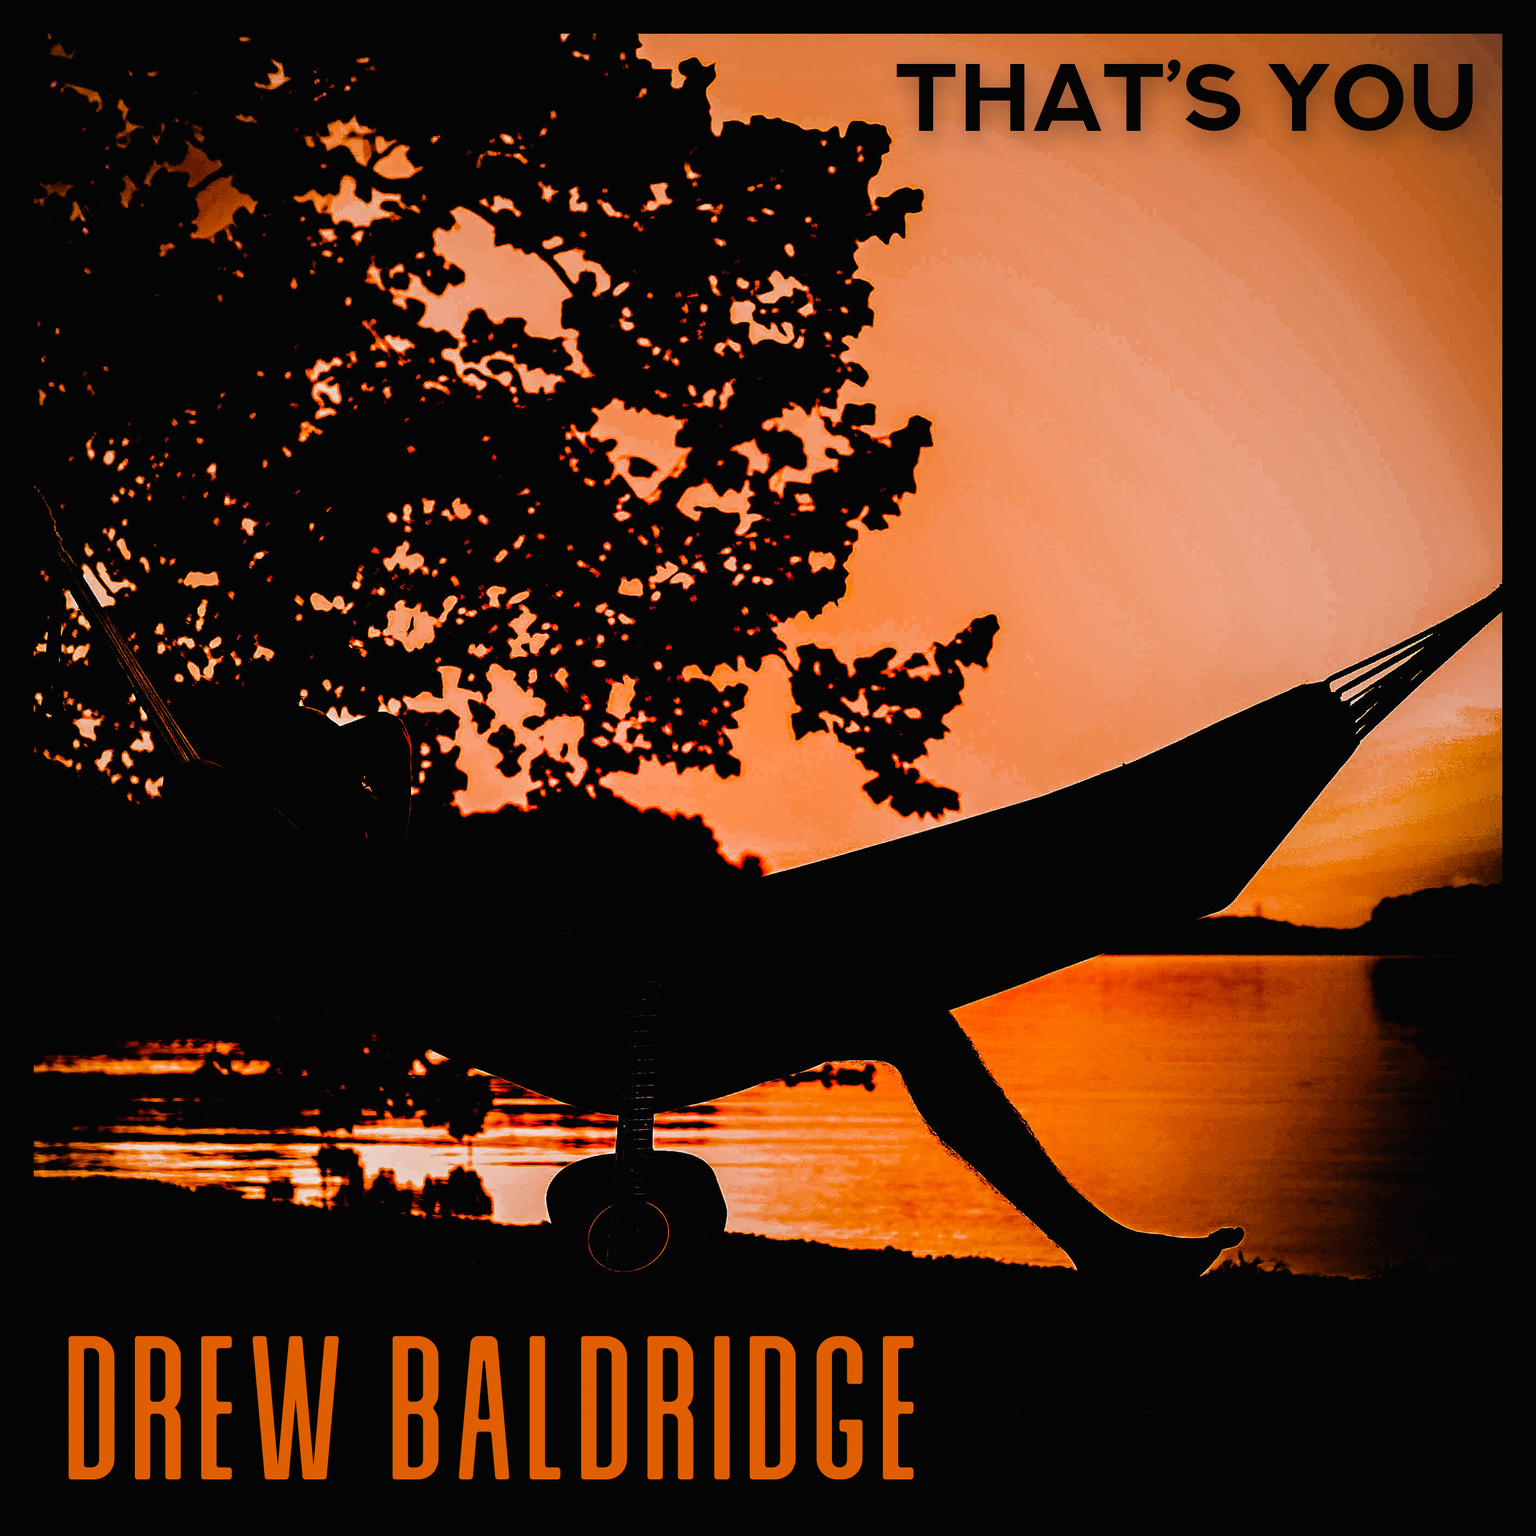 Drew Baldridge’s new song "That's You” is available everywhere now, February 12th